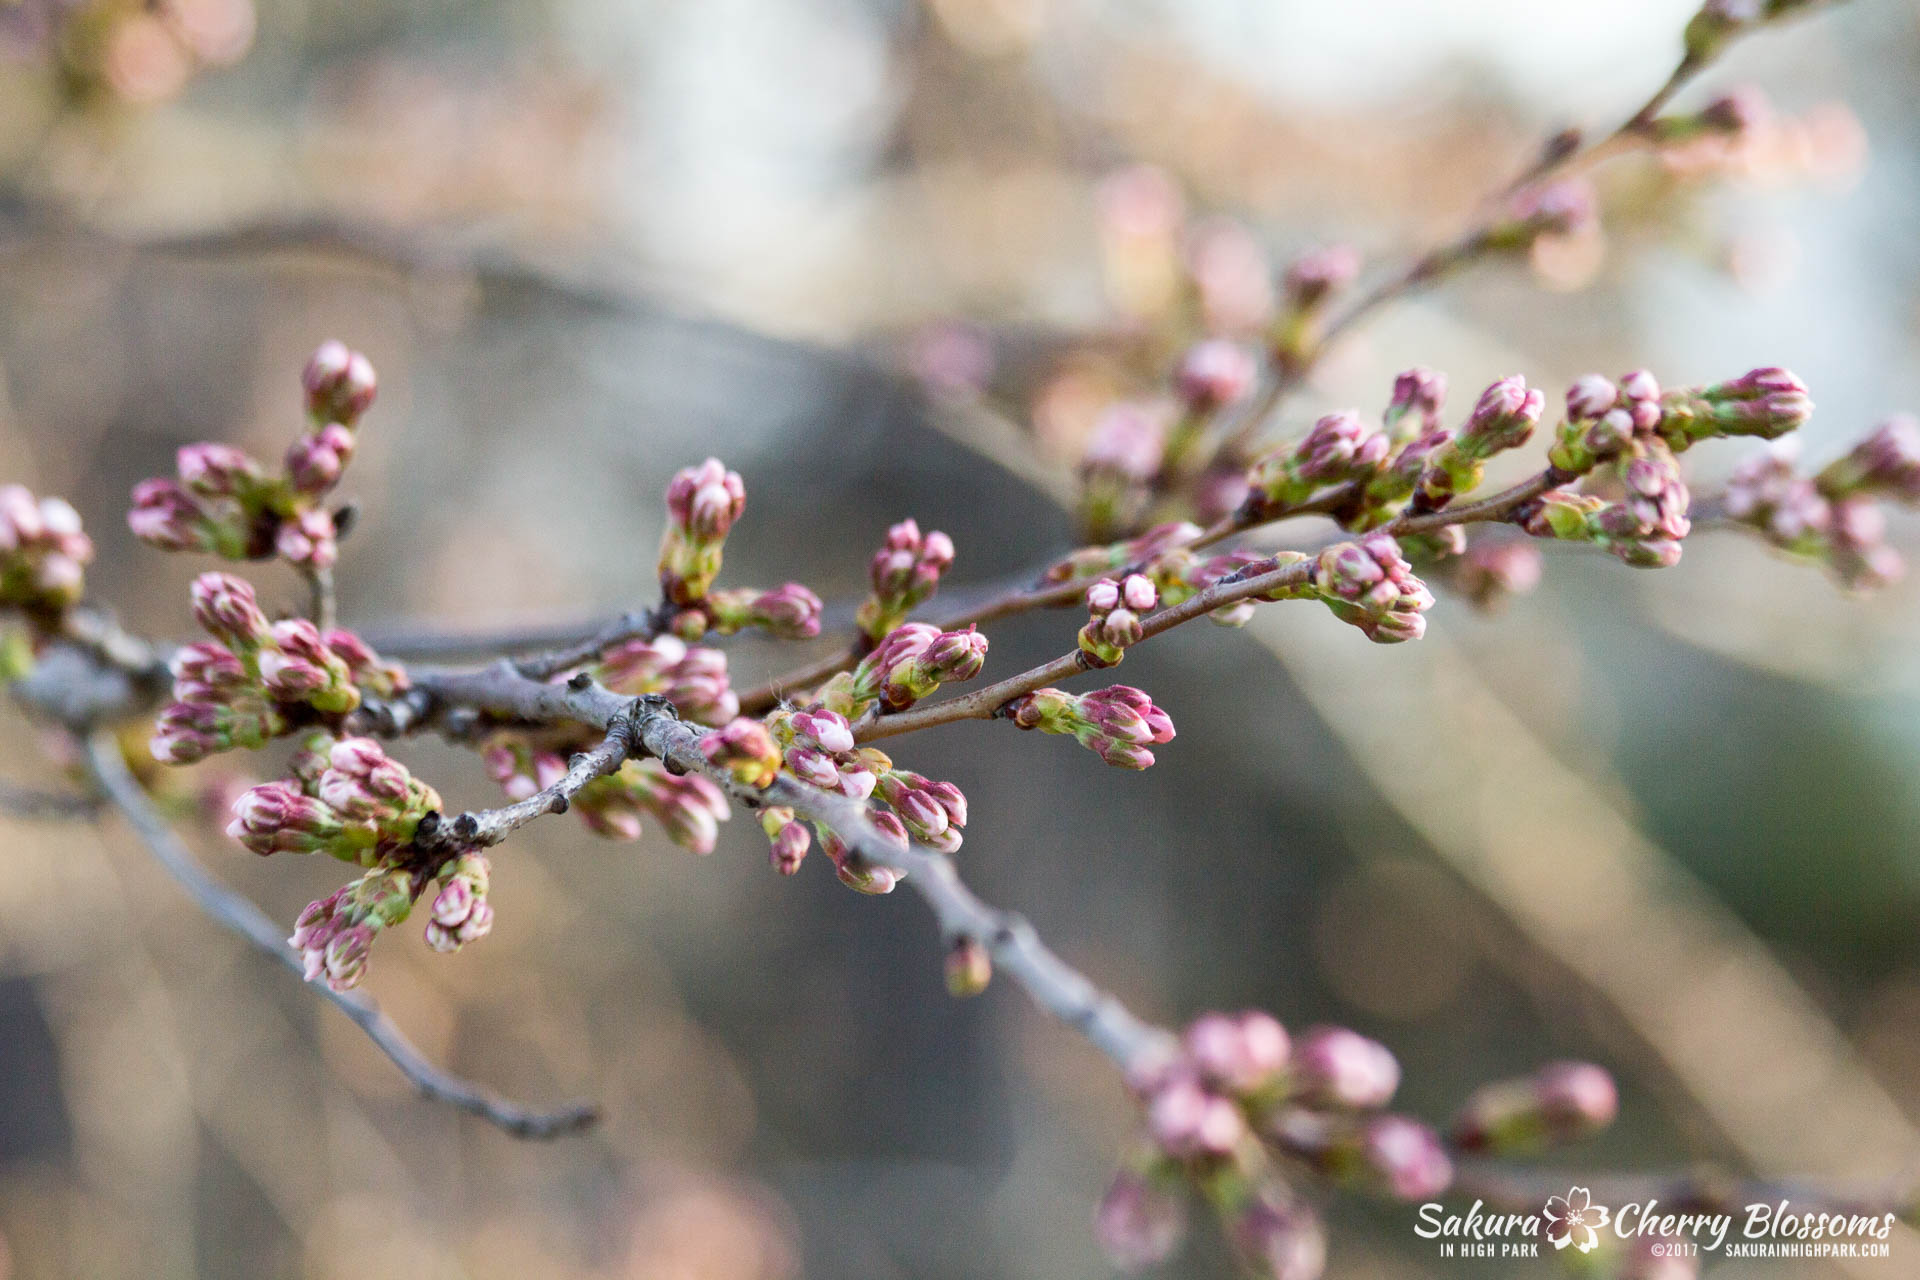 Sakura-in-High-Park-April-17-2017-florets-are-emerging-from-the-buds-throughout-the-park-16.jpg